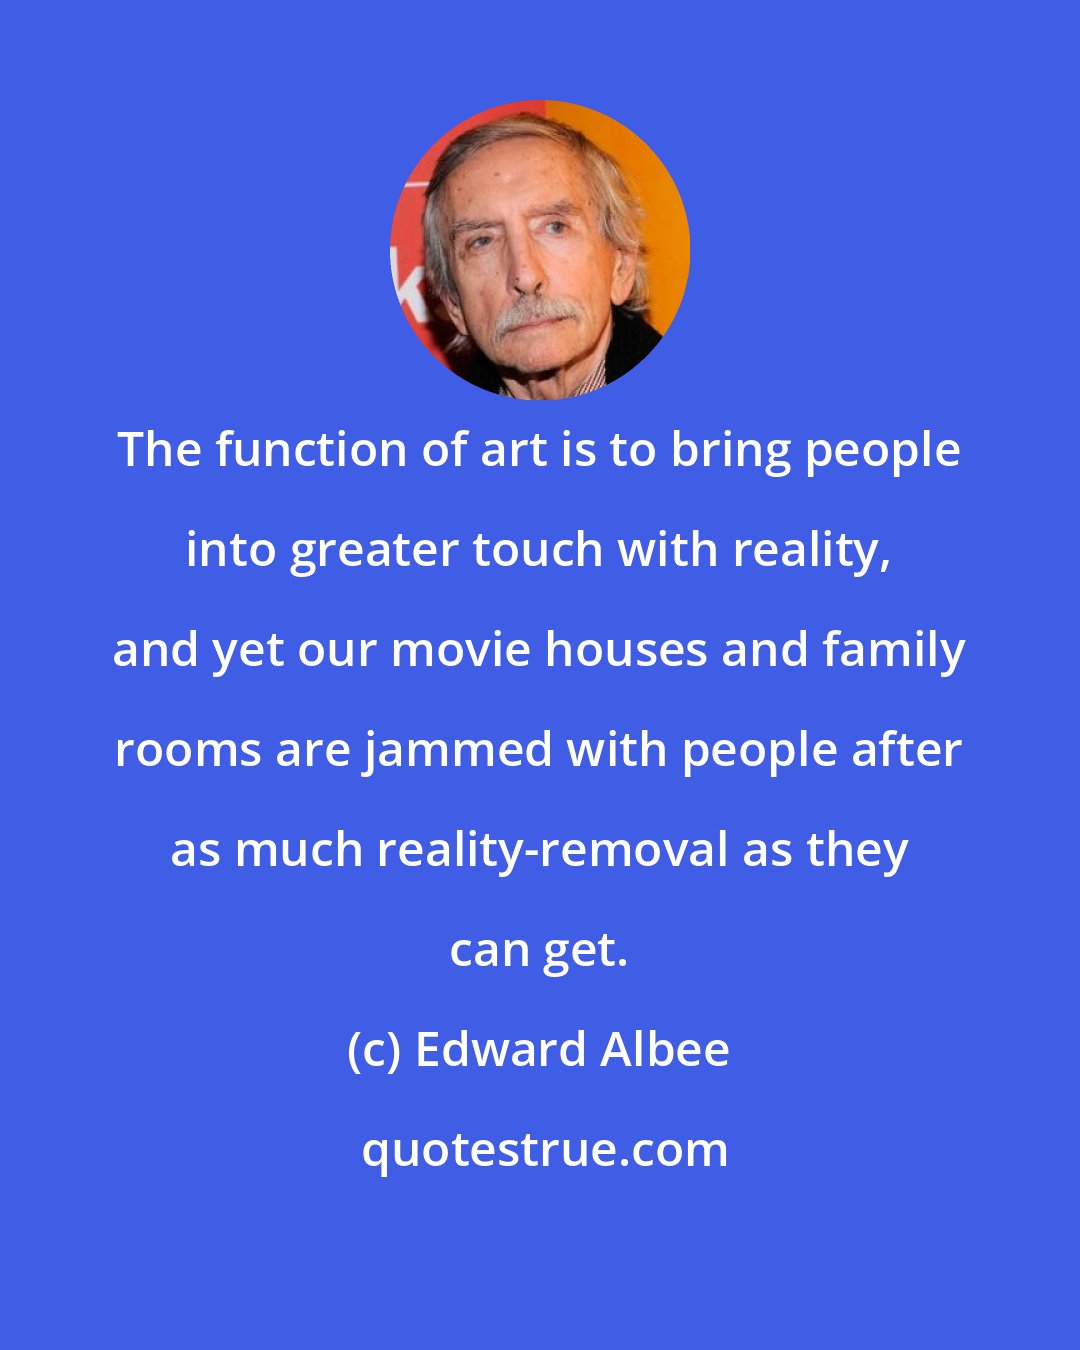 Edward Albee: The function of art is to bring people into greater touch with reality, and yet our movie houses and family rooms are jammed with people after as much reality-removal as they can get.